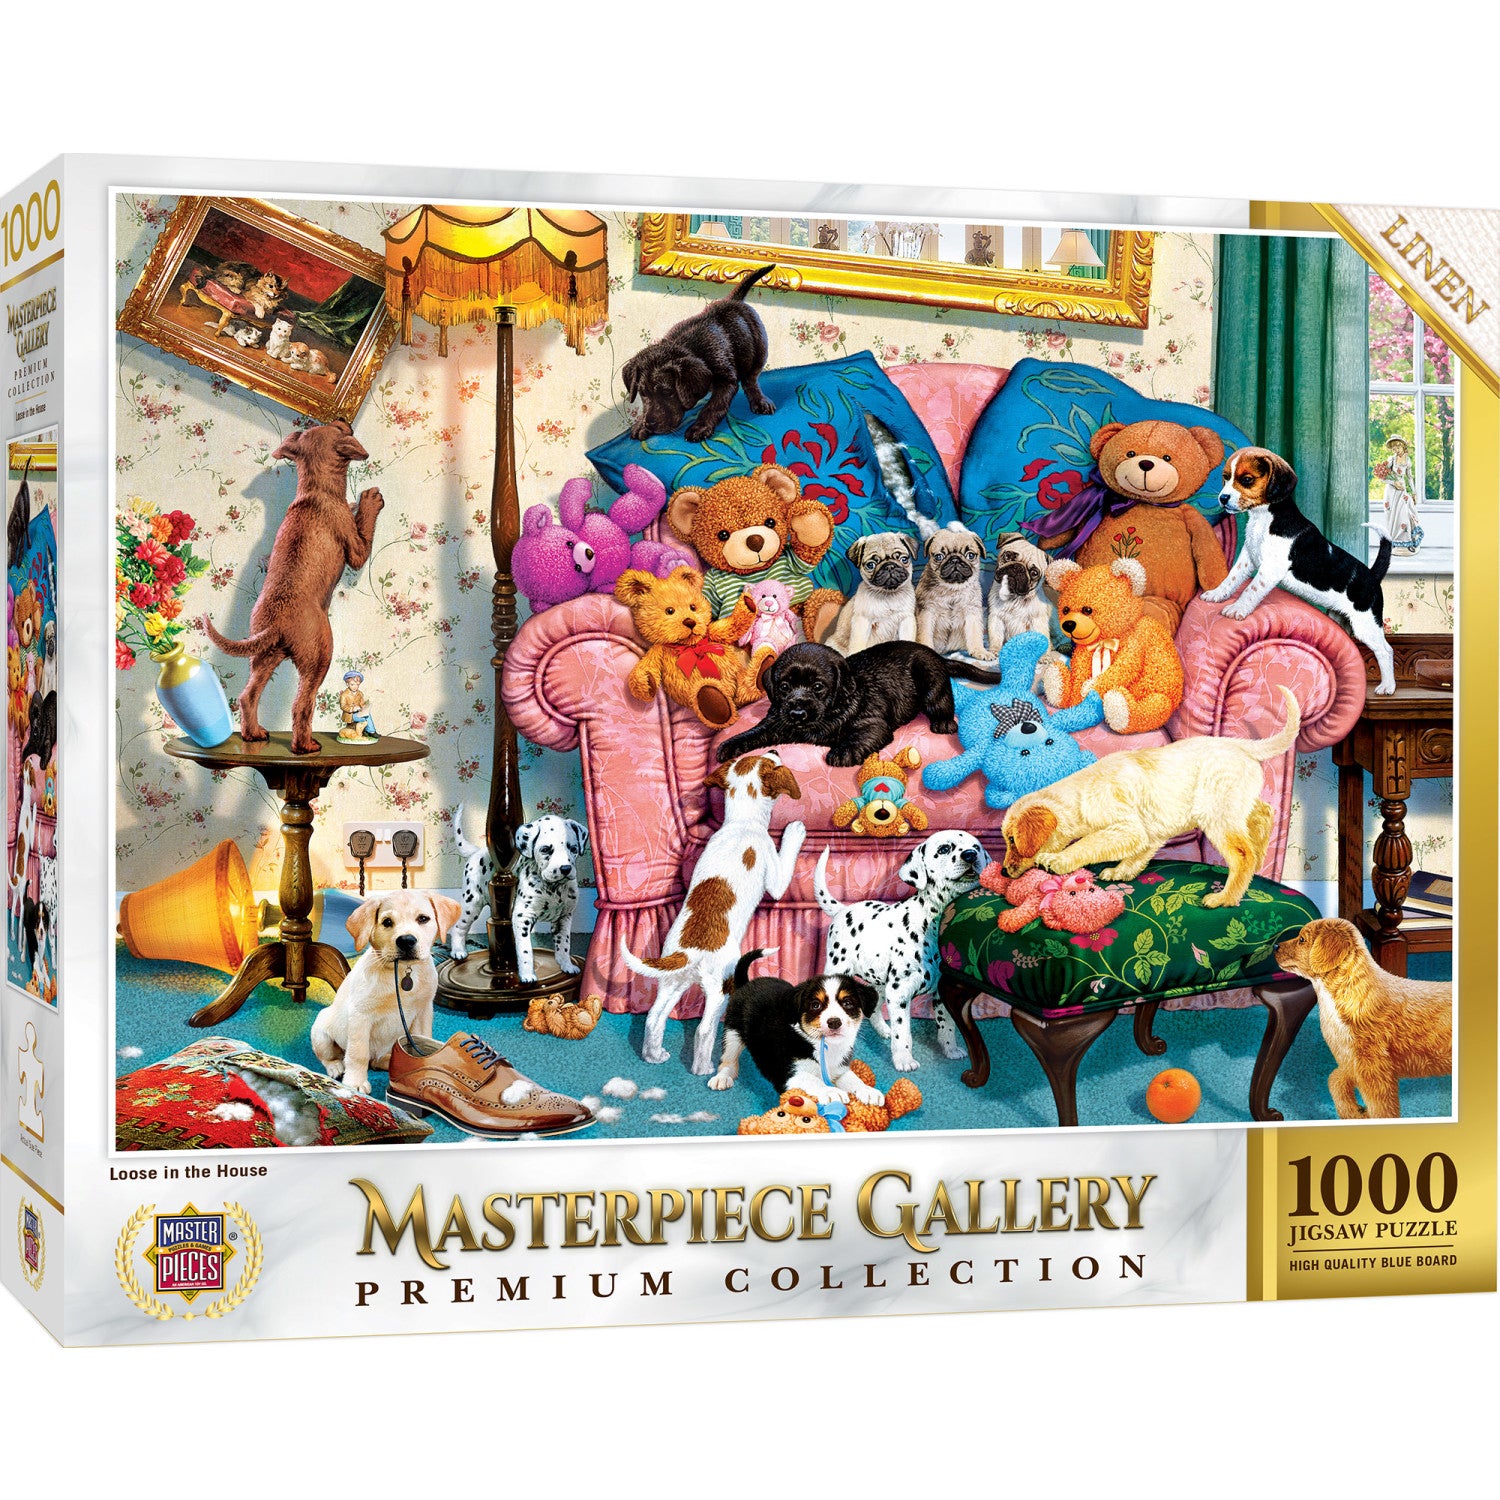 Masterpiece Gallery - Loose in the House 1000 Piece Puzzle